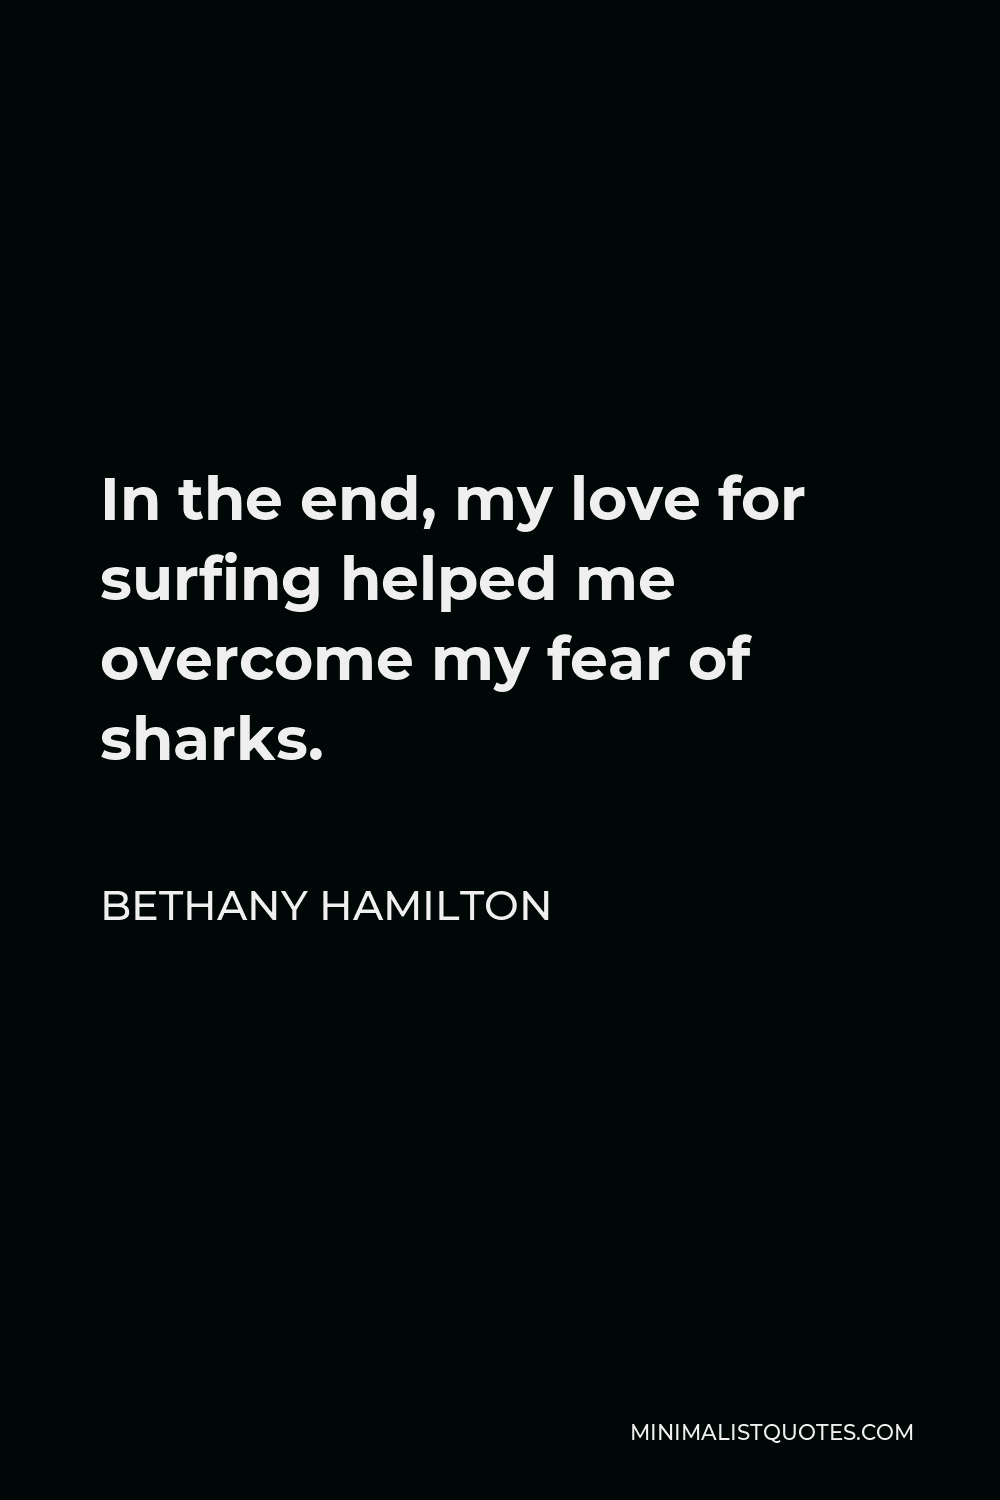 Bethany Hamilton Quote - In the end, my love for surfing helped me overcome my fear of sharks.